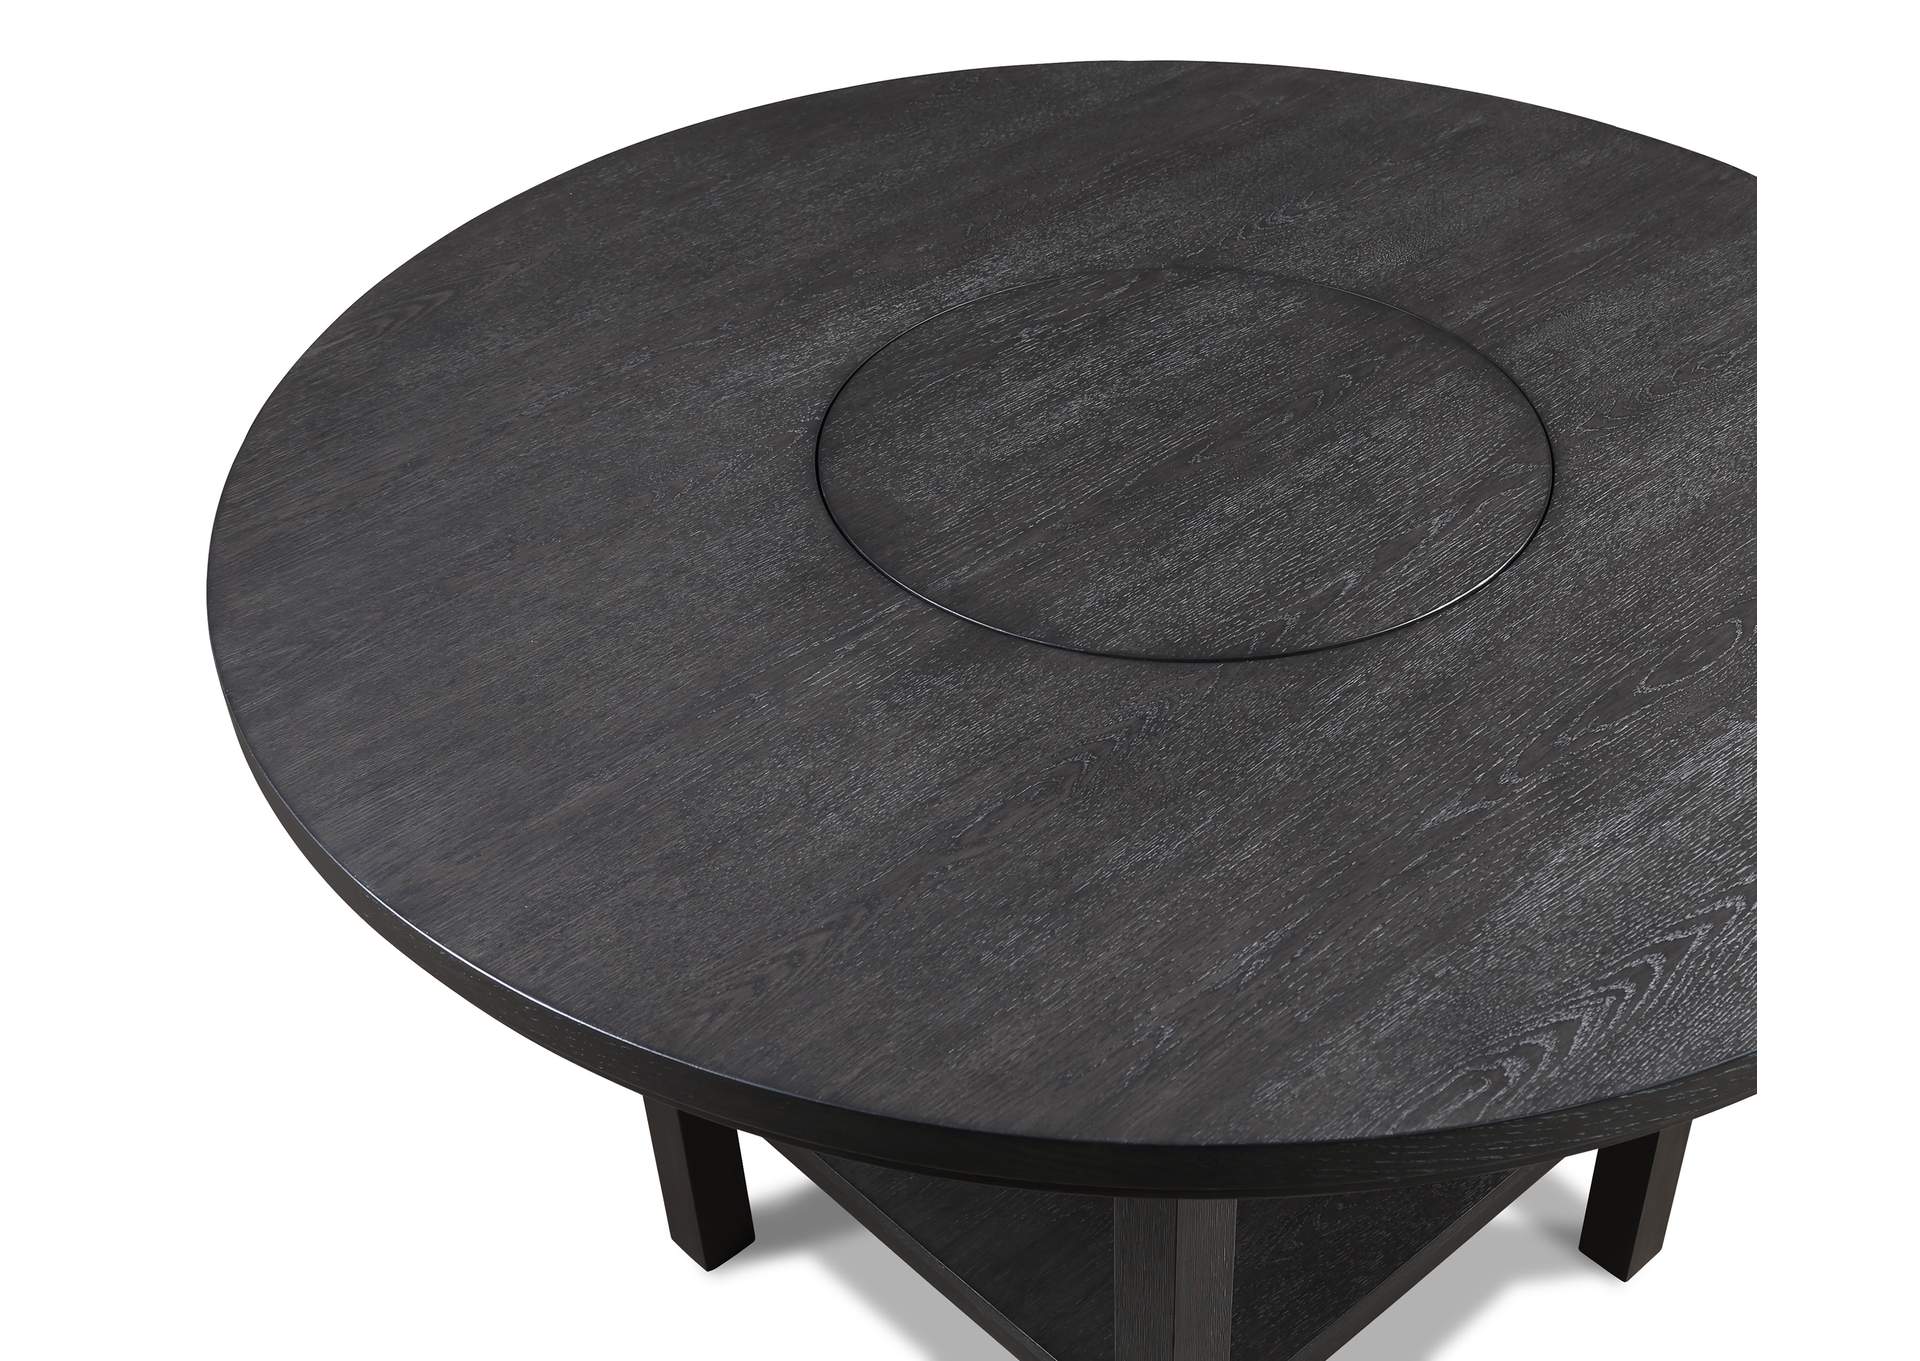 Guthrie Counter Height Round Table W - Lazysusan,Crown Mark